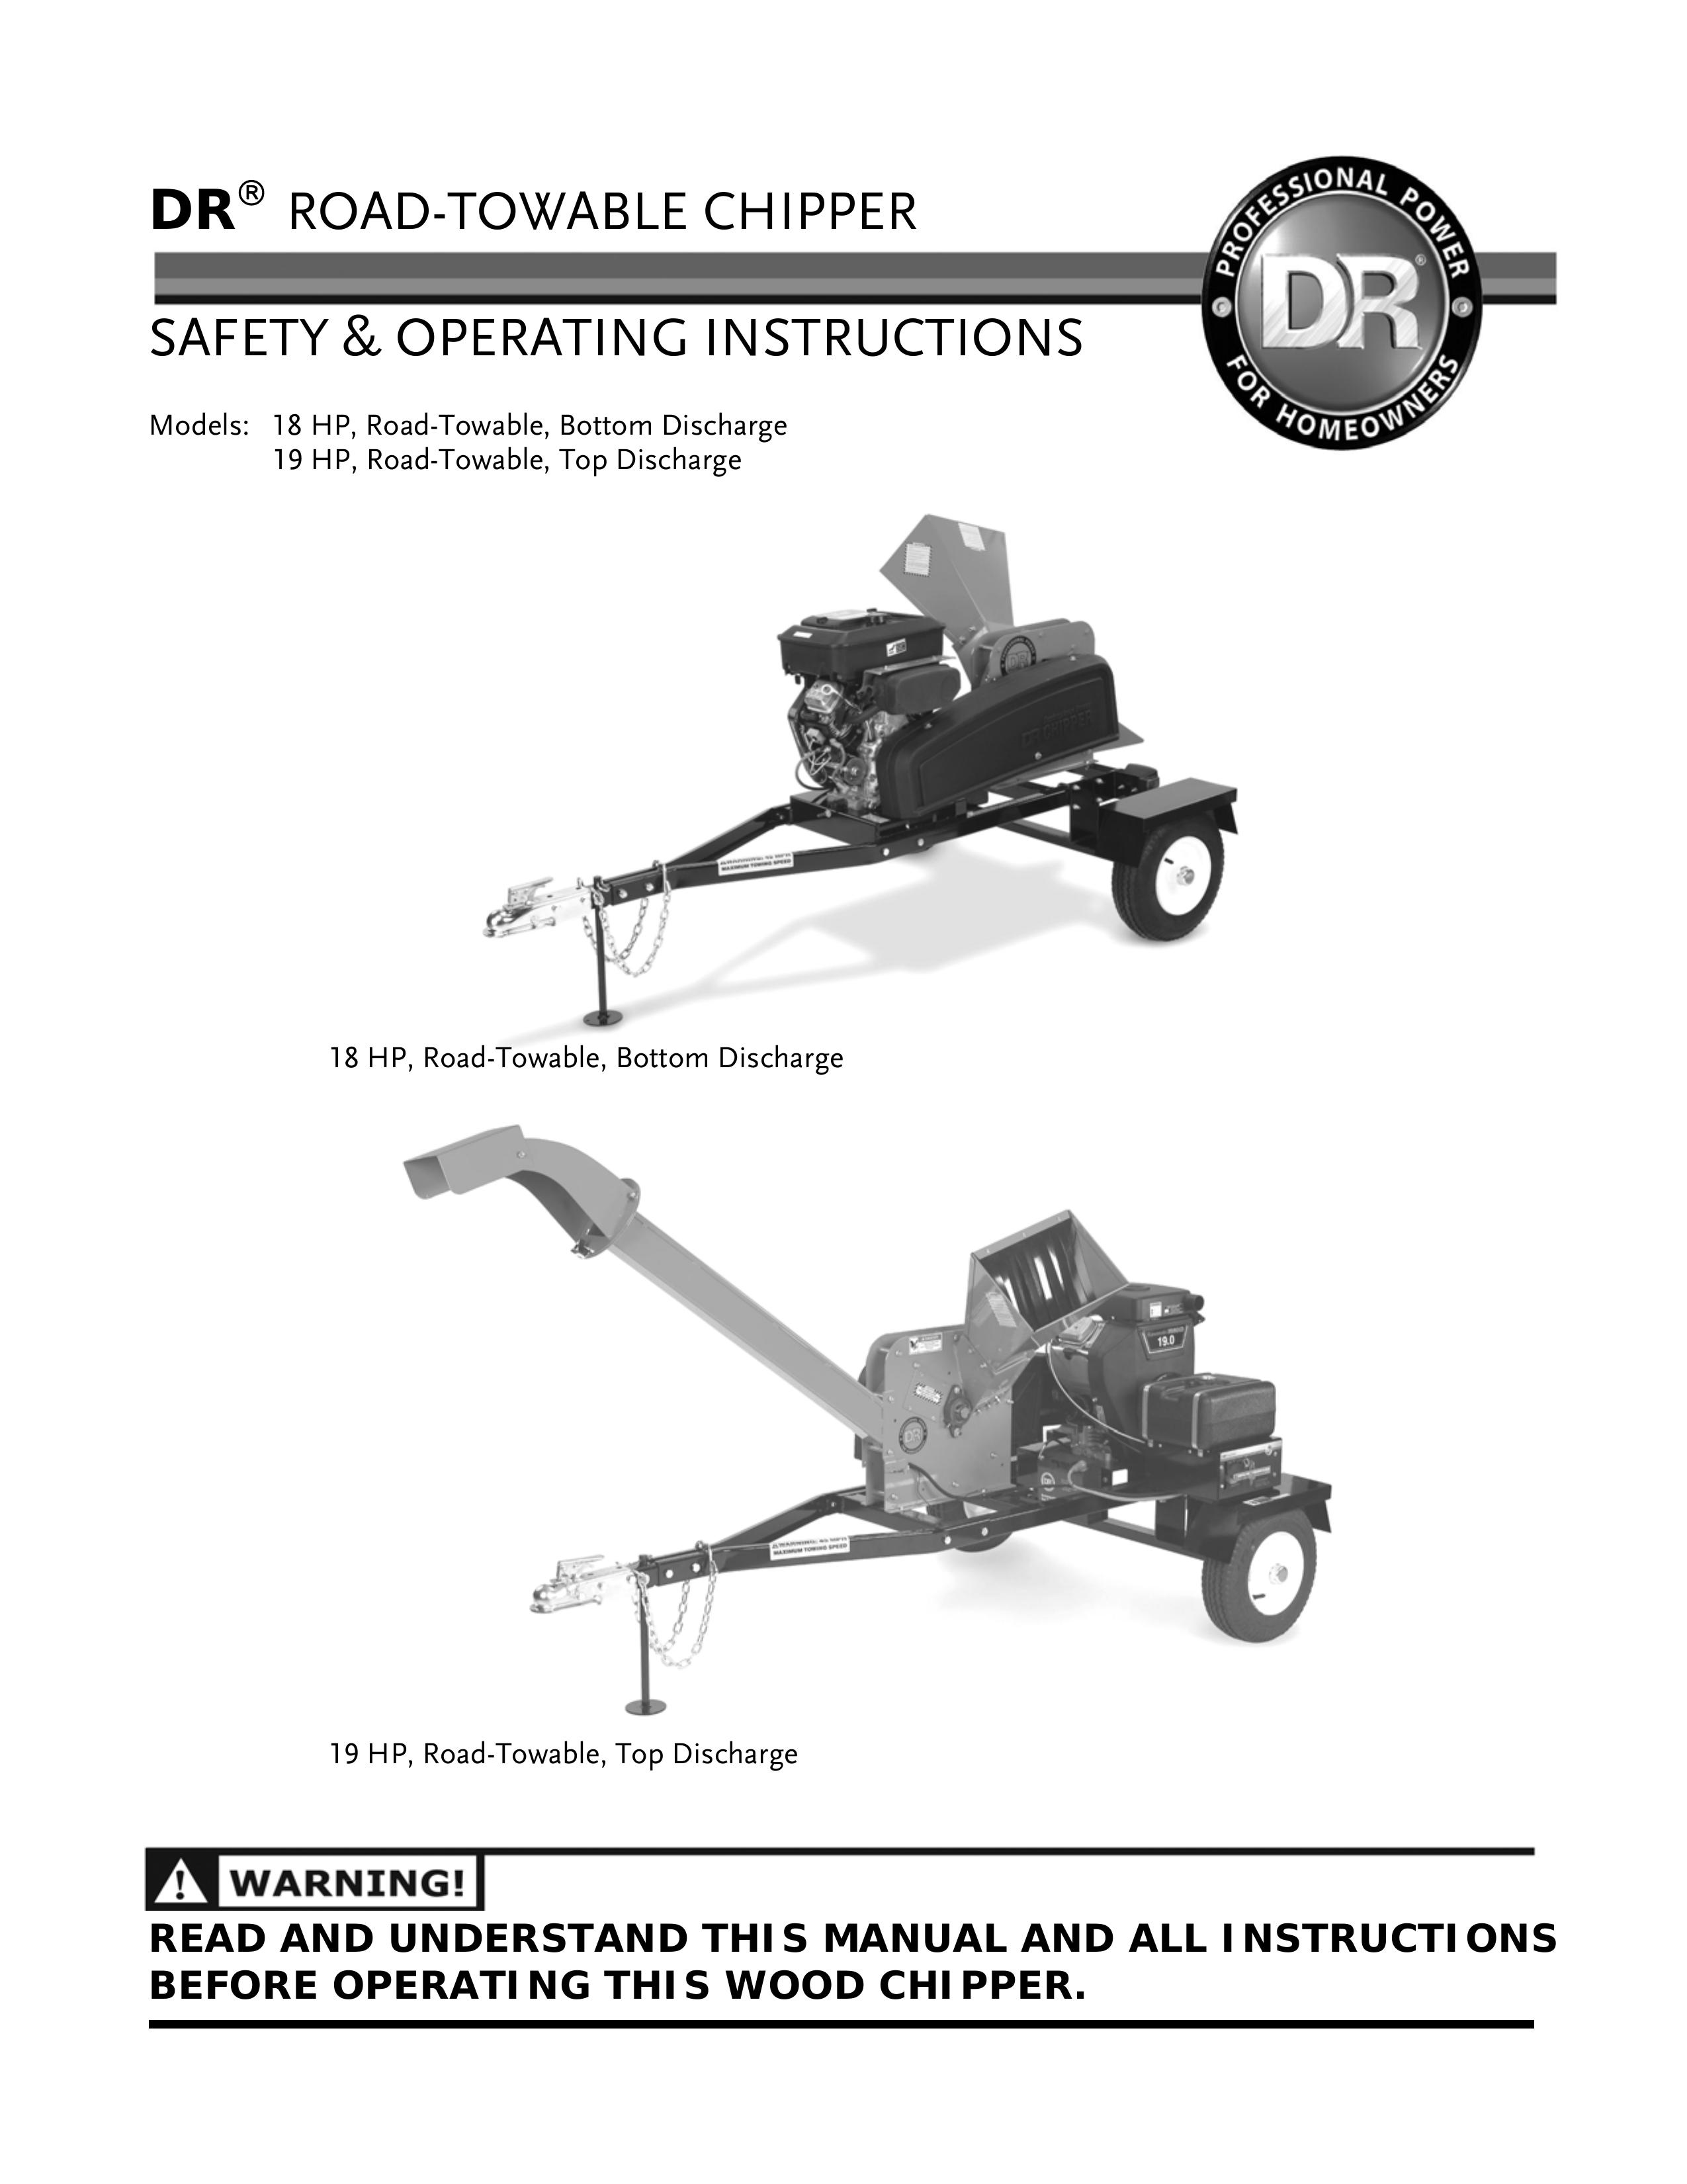 Country Home Products 19HP Chipper User Manual